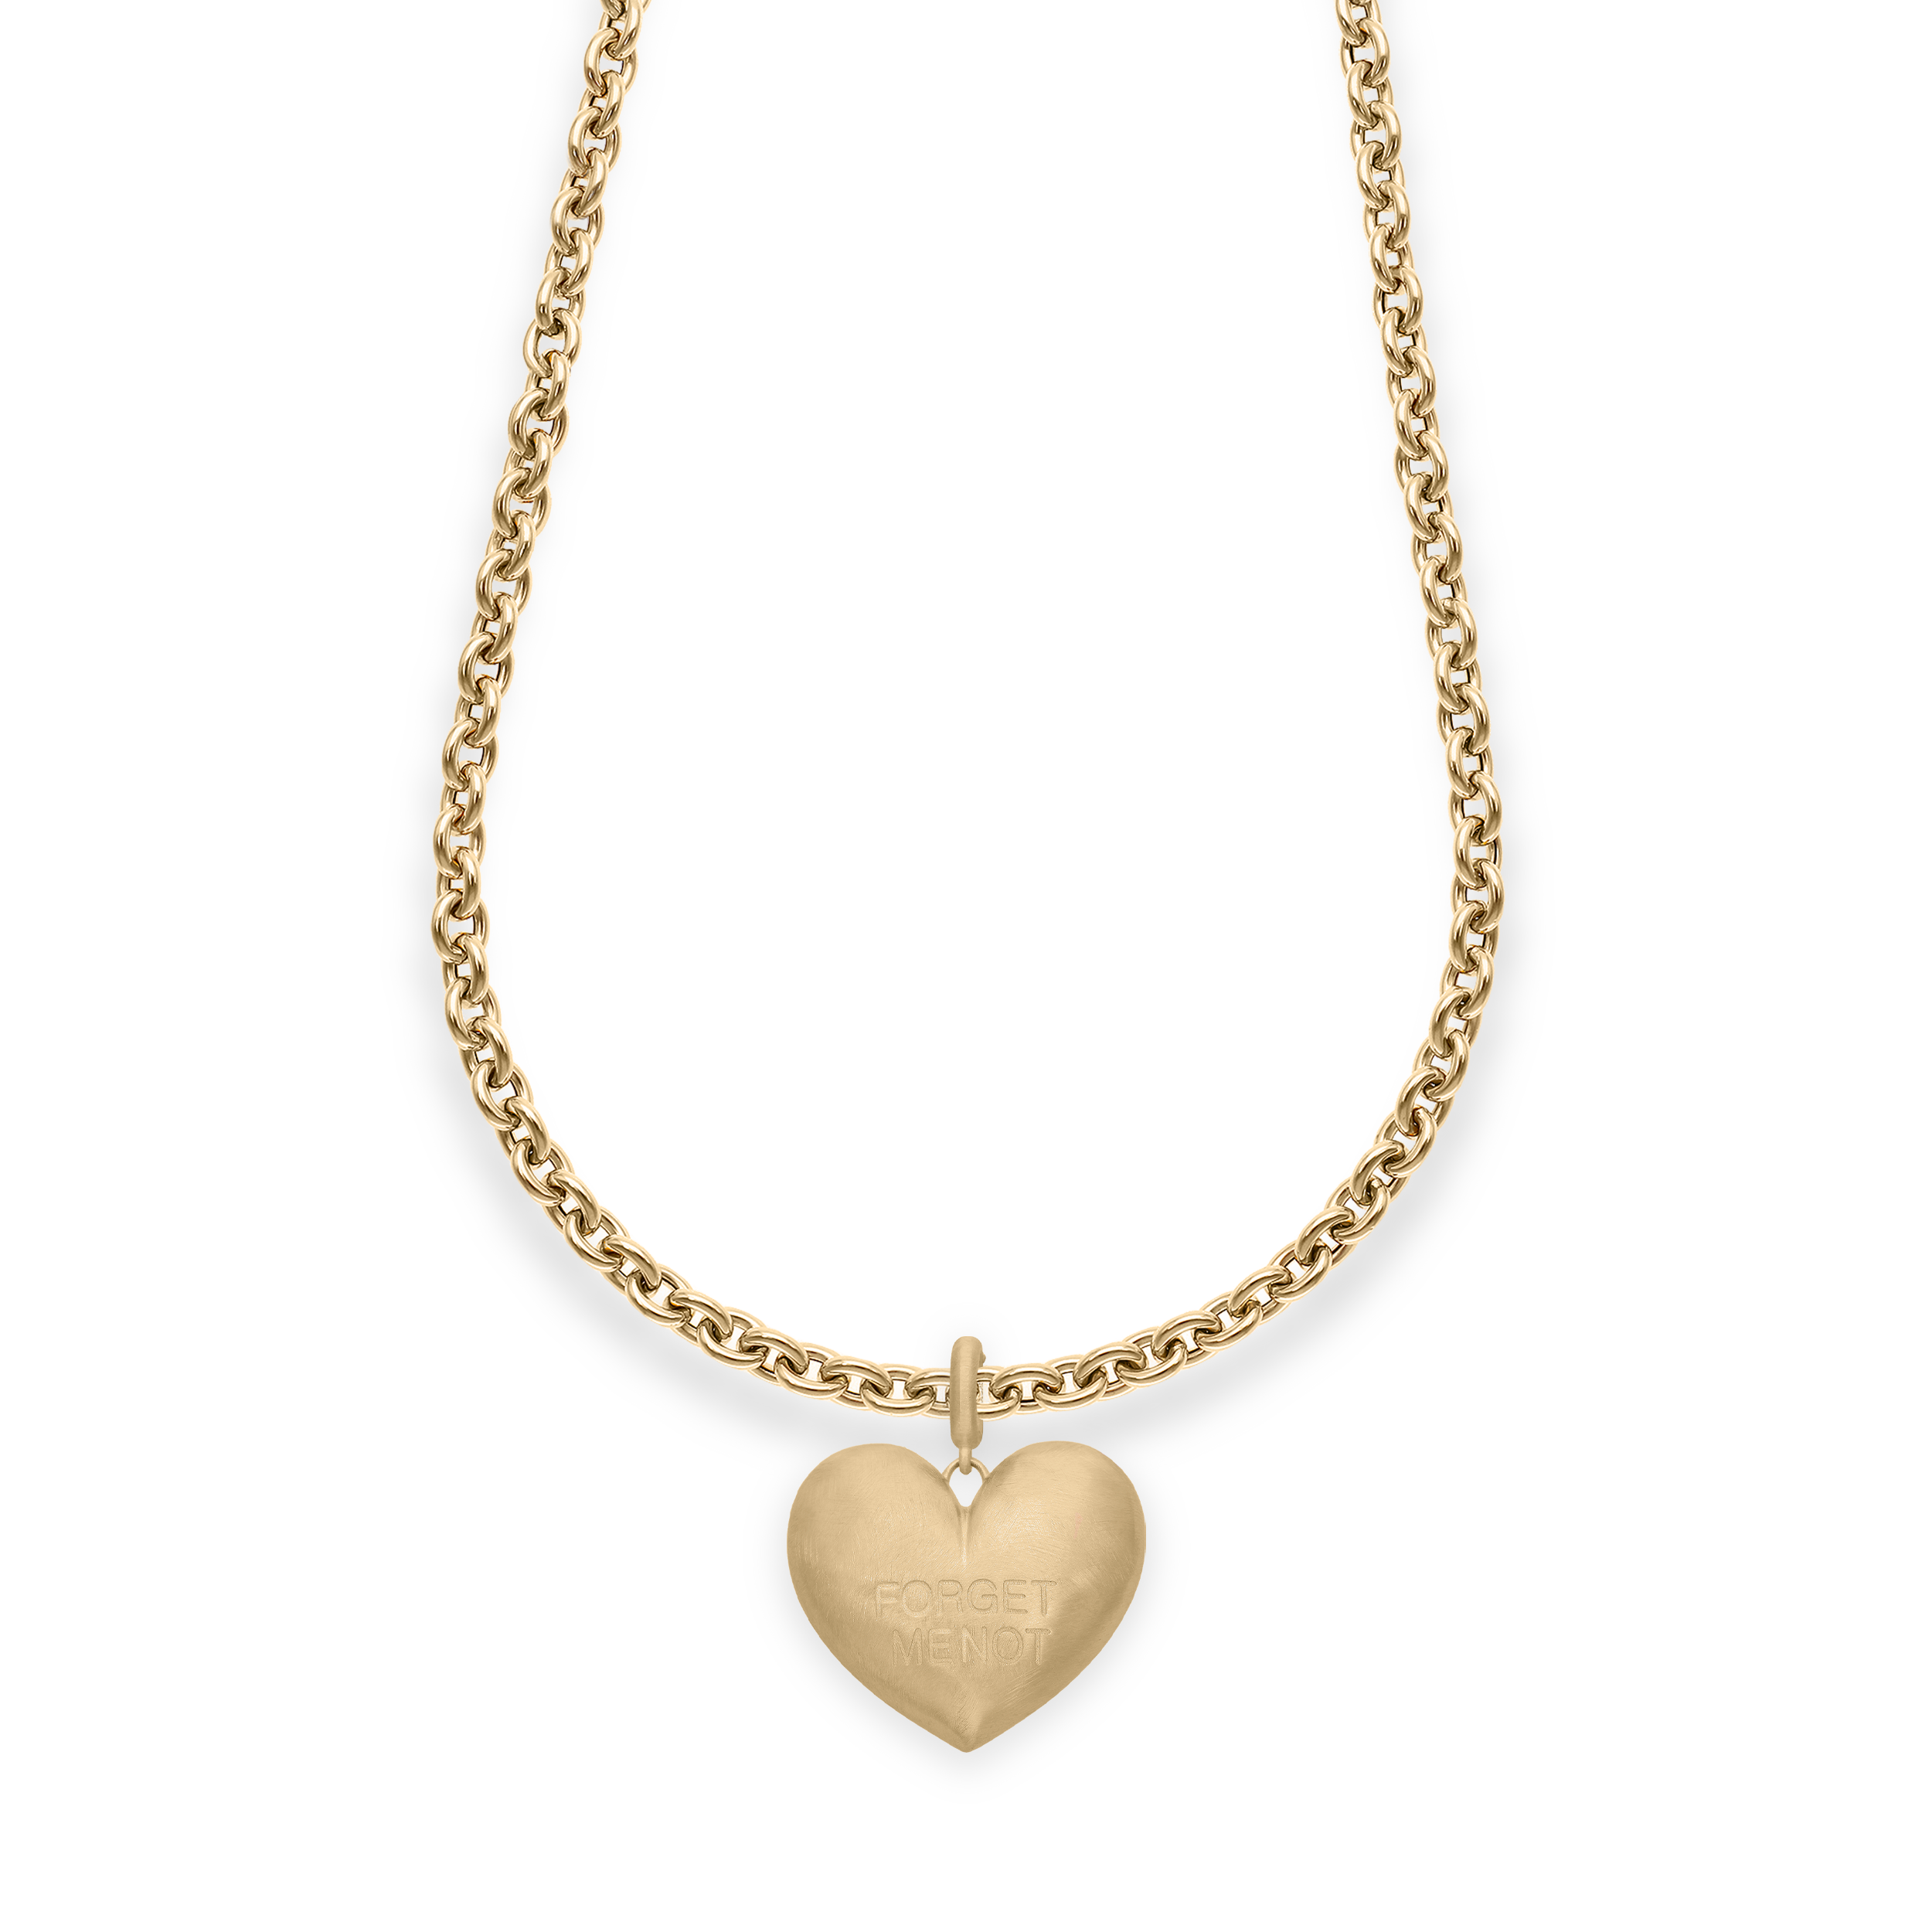 Paulette Brushed Yellow Gold "Forget Me Not" Heart Pendant on Long Chain